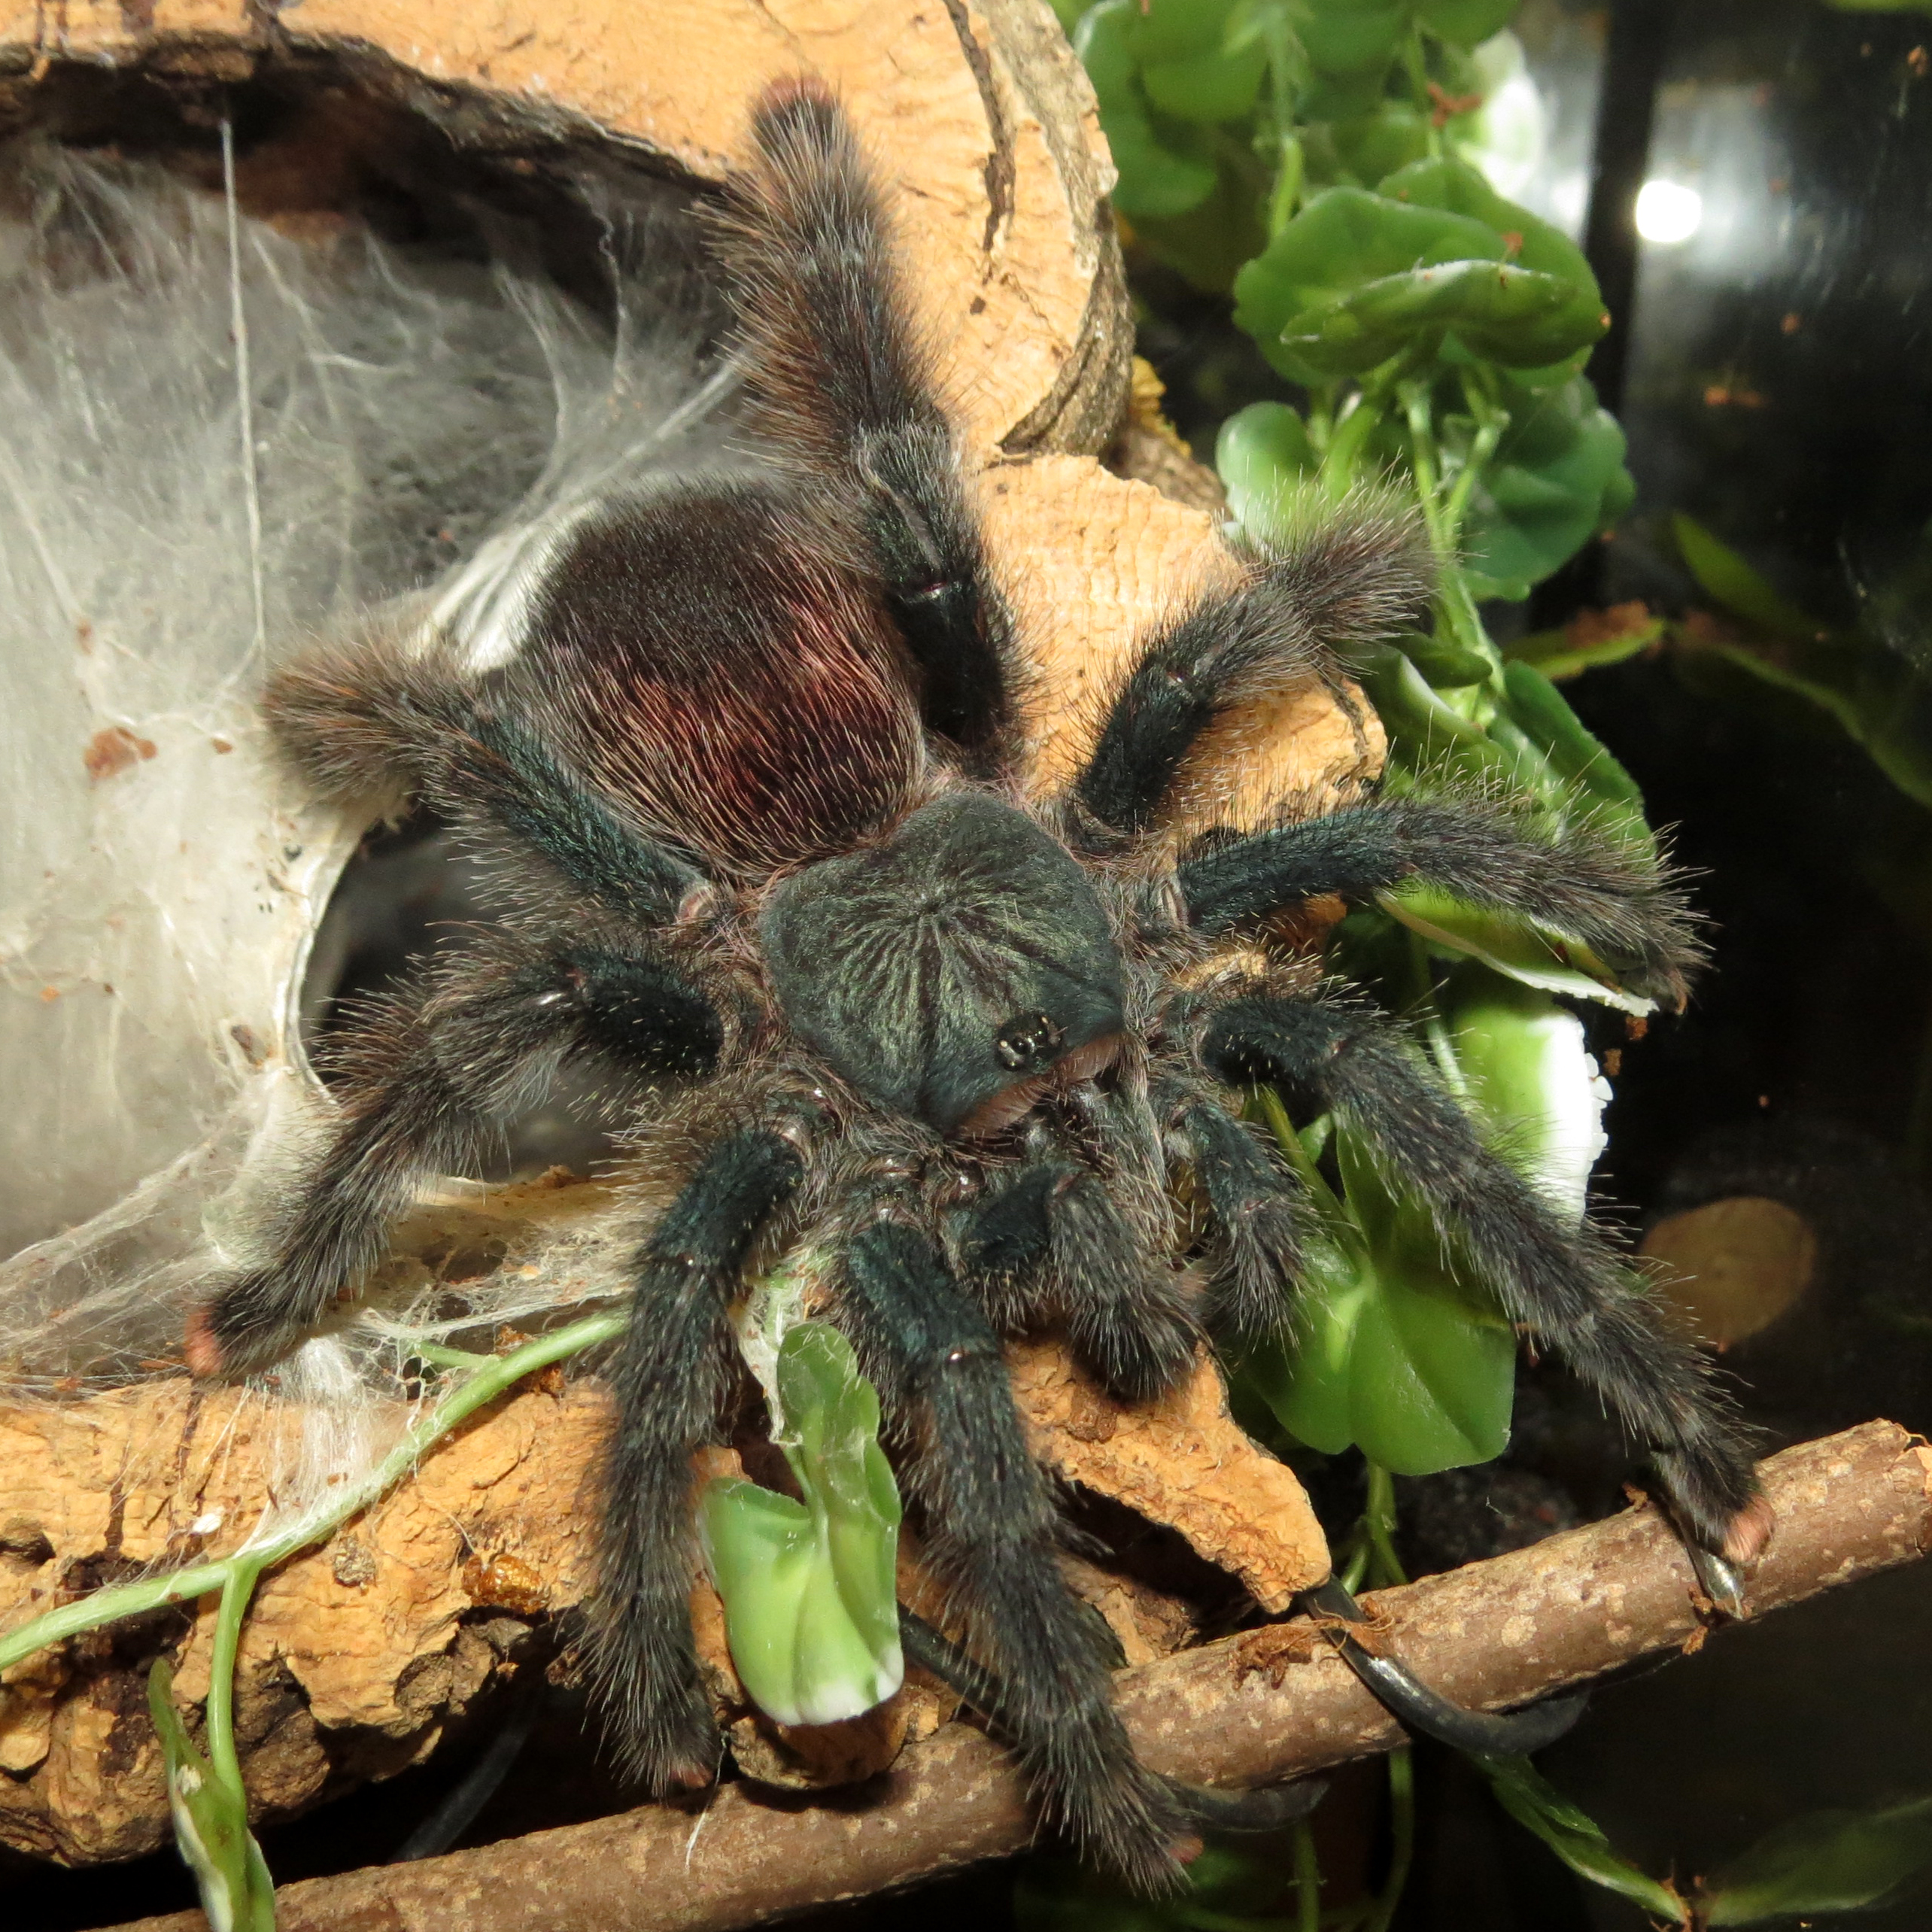 Which Avicularia avicularia Morph Is She?